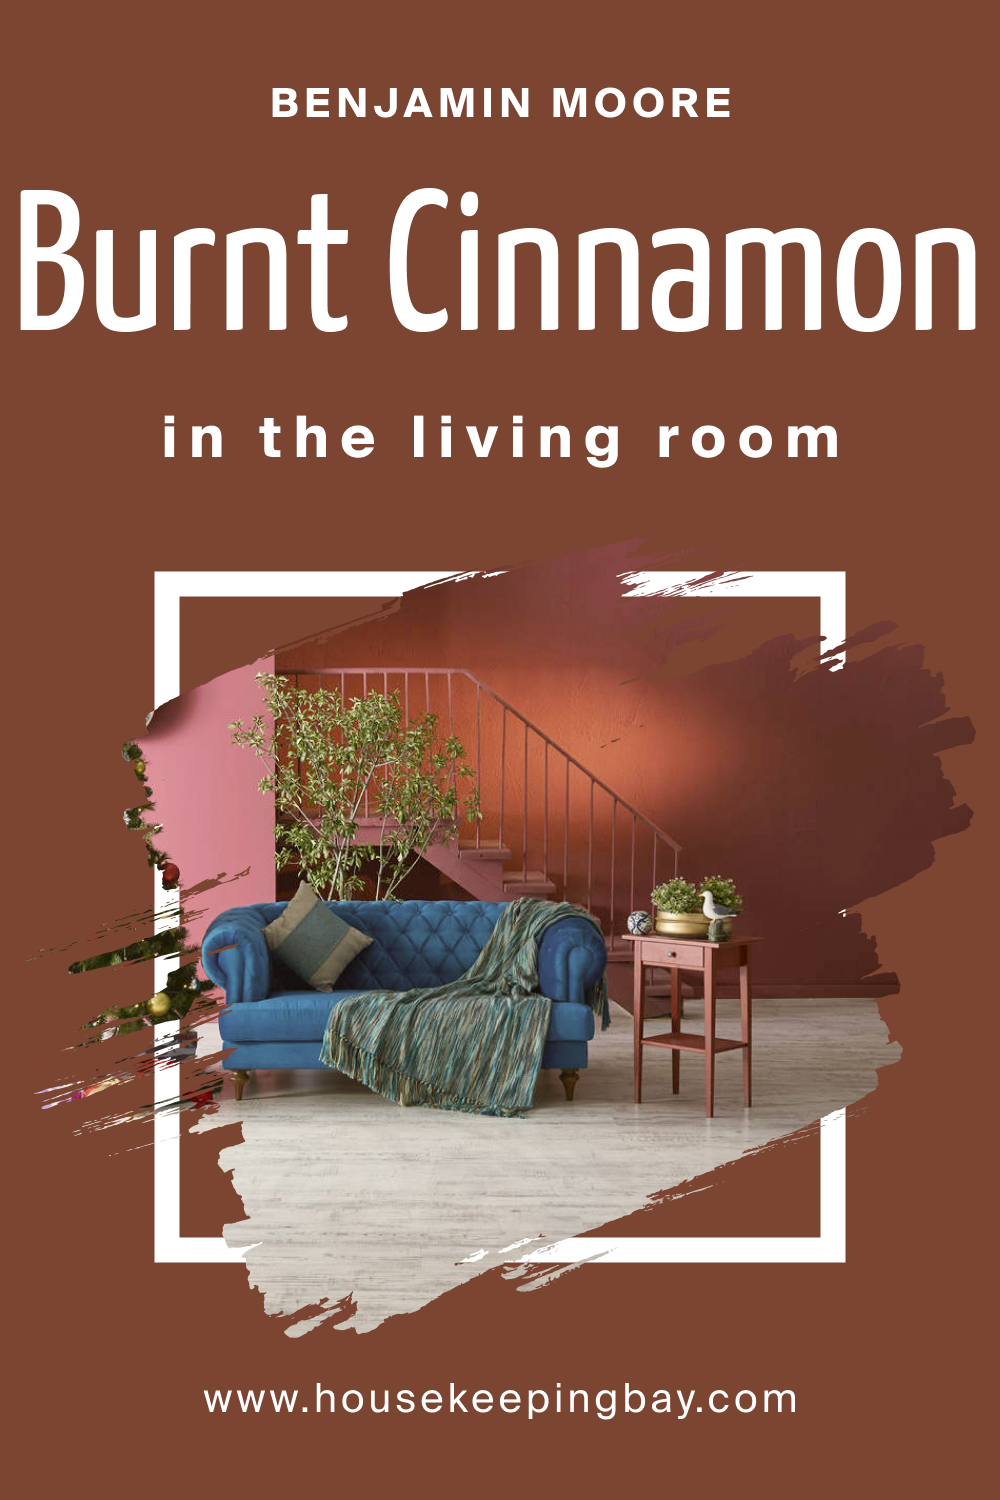 How to Use BM Burnt Cinnamon 2094-10 in the Living Room?